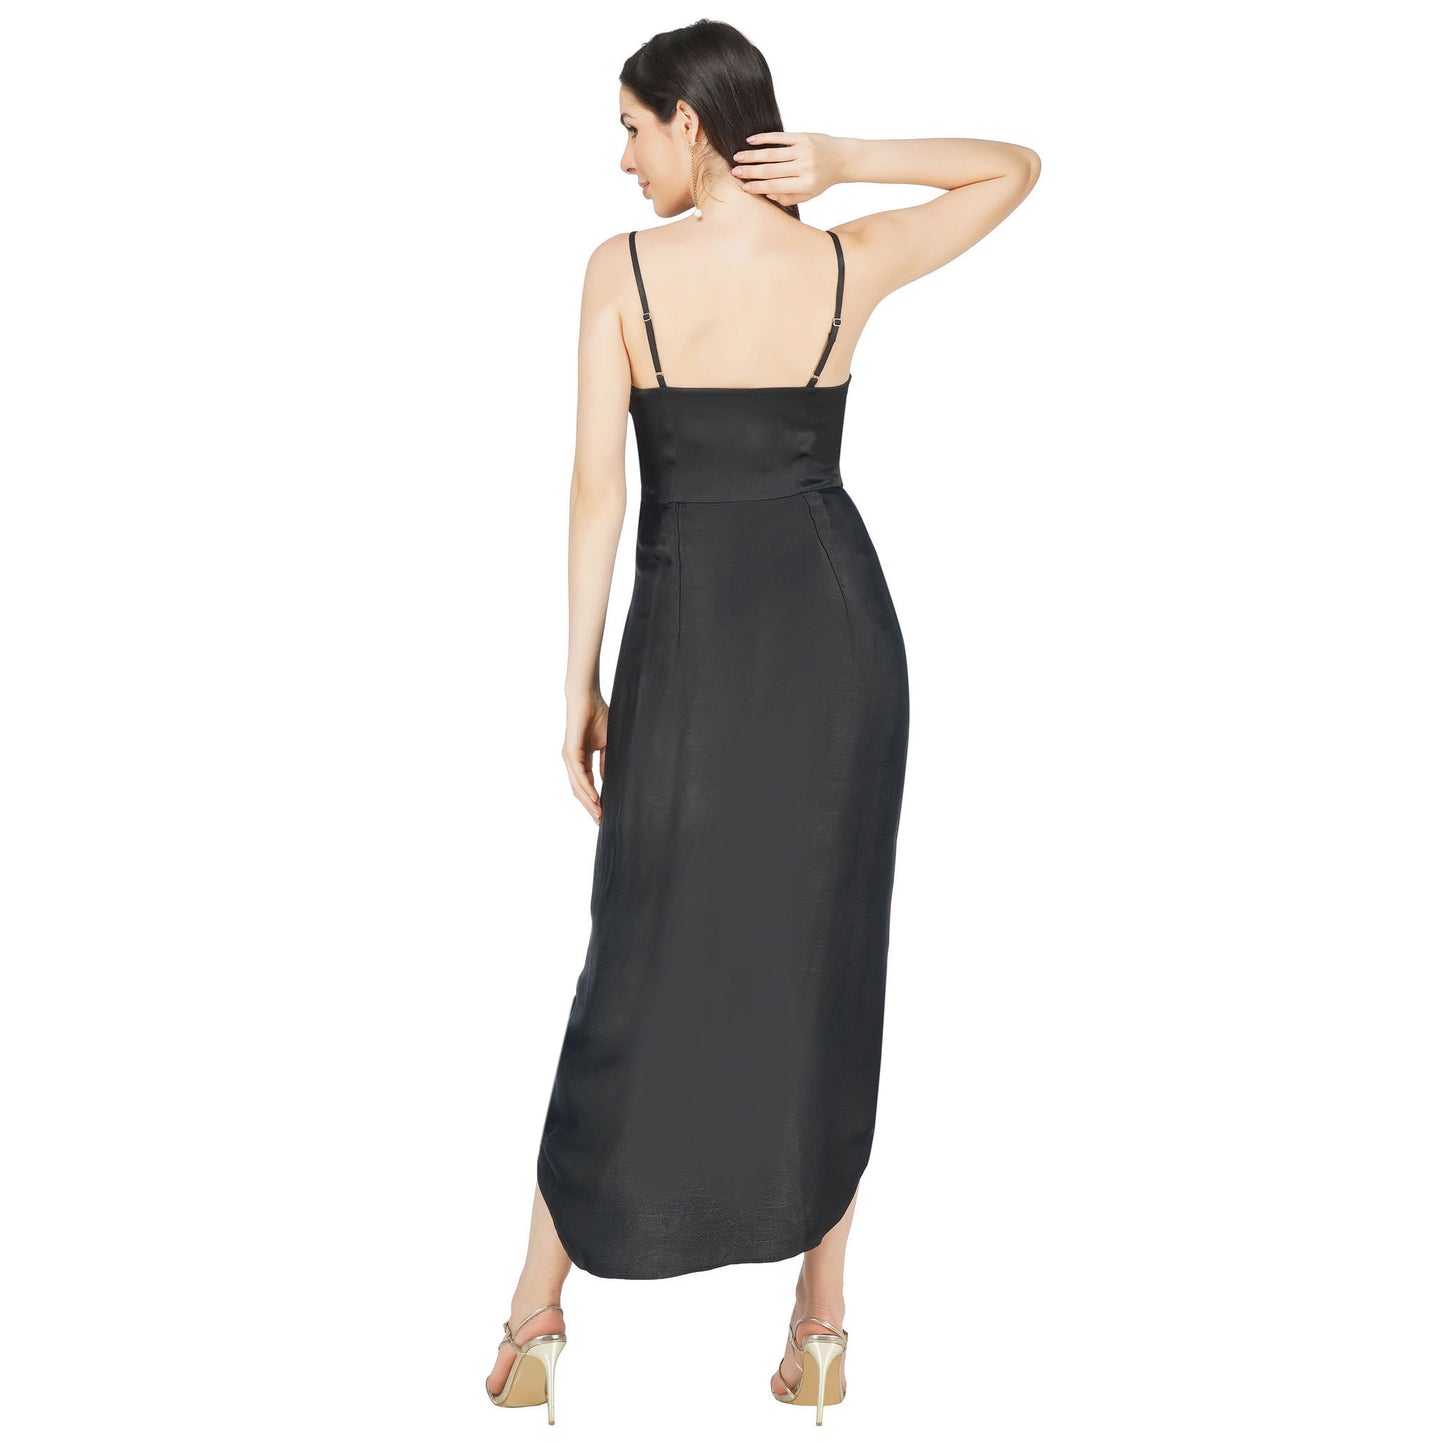 SLAY. Women's Black Shimmer Fabric Ruched Satin Maxi Dress with front slit-clothing-to-slay.myshopify.com-